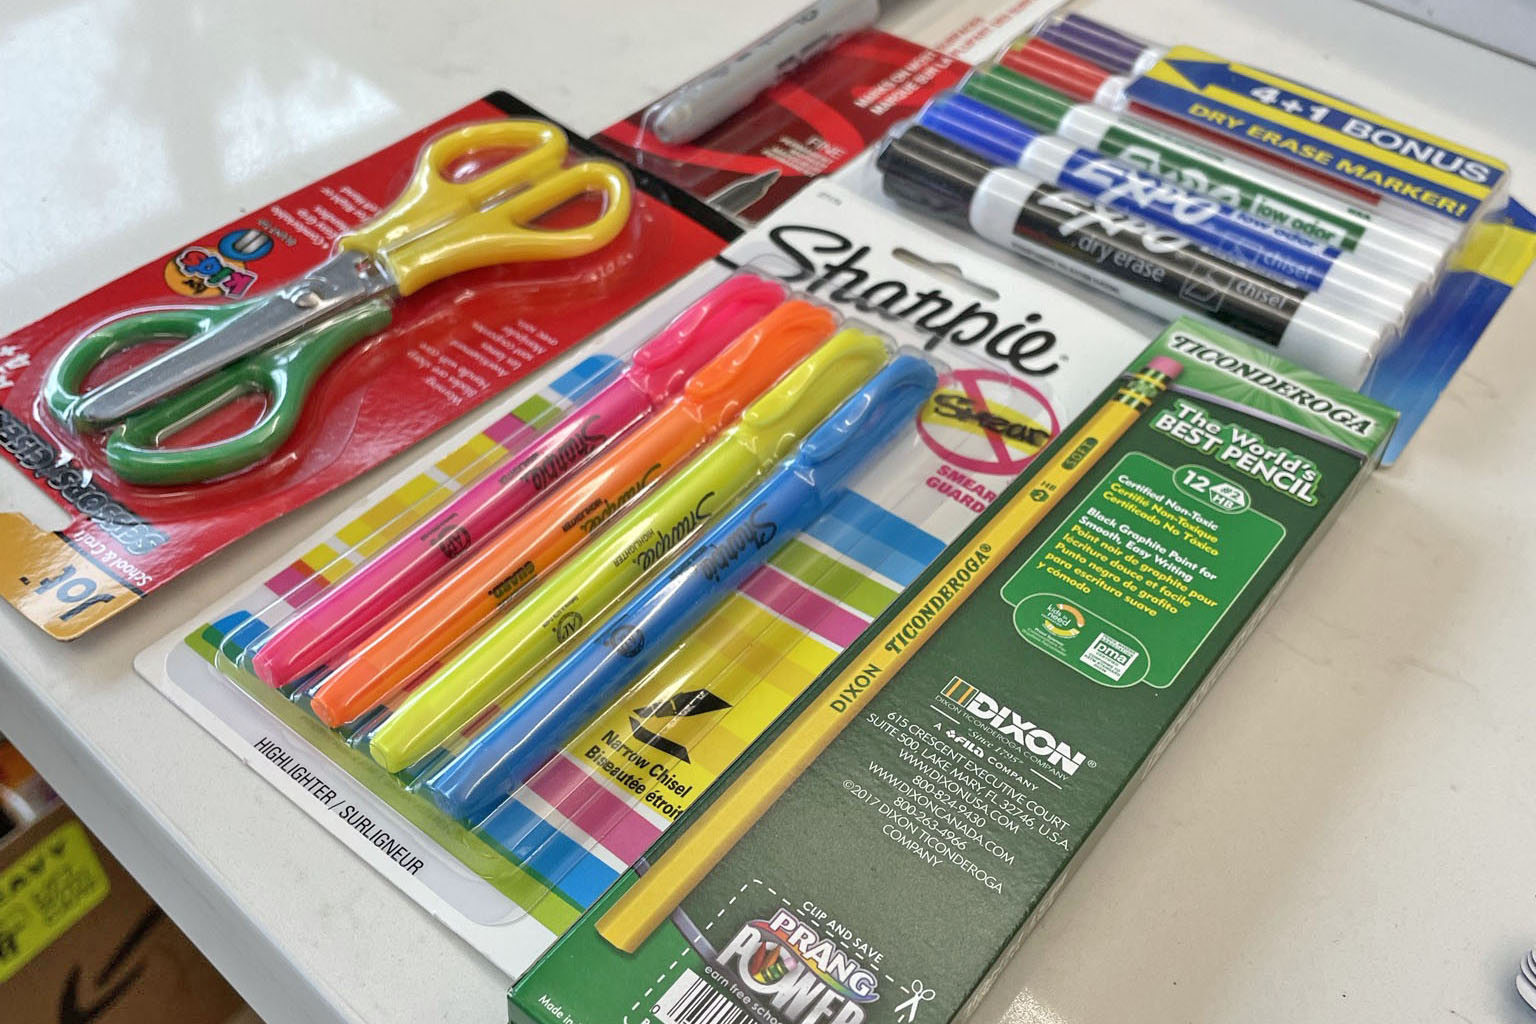 School supplies laid out on a table, including scissors, highlighters, pencils, dry erase markers and a Sharpie pen